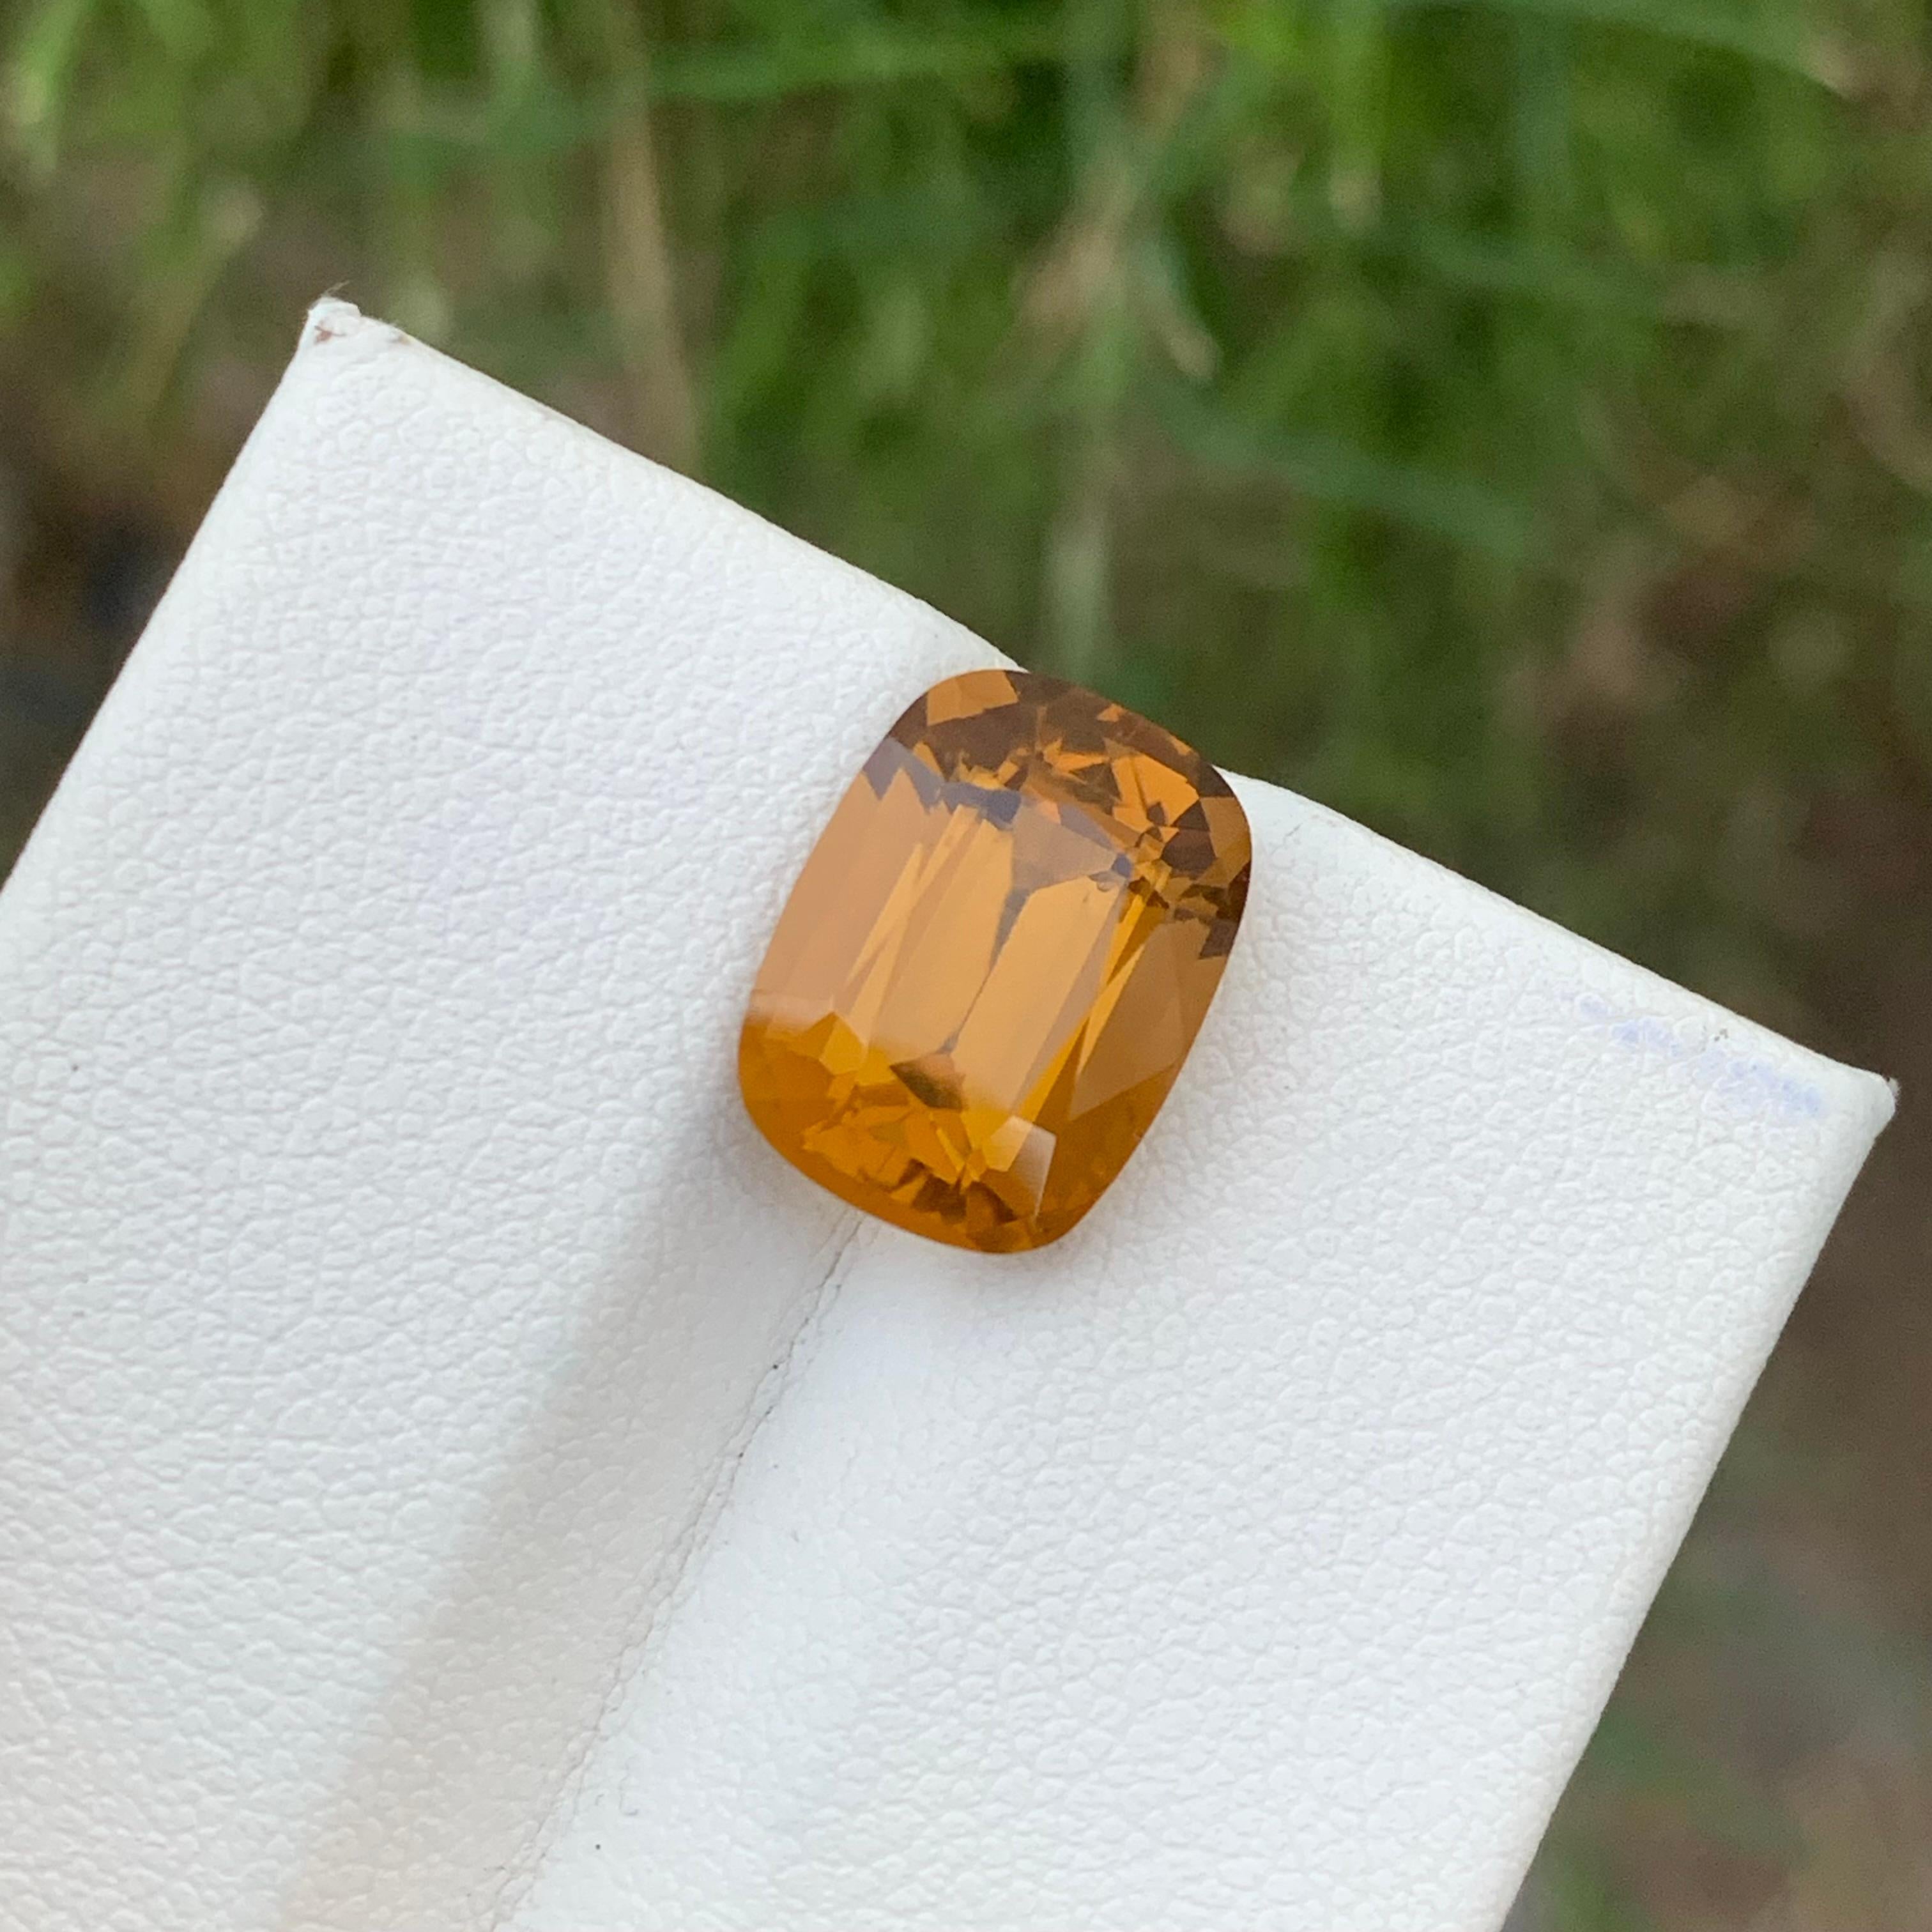 Loose Citrine
Weight: 6.40 Carats 
Dimension: 13.1x9.8x7.9 Mm
Origin: Brazil
Shape: Cushion
Color: Yellow
Treatment: Non
Citrine is a radiant and captivating gemstone known for its warm, golden hues and the sense of joy it exudes. This variety of